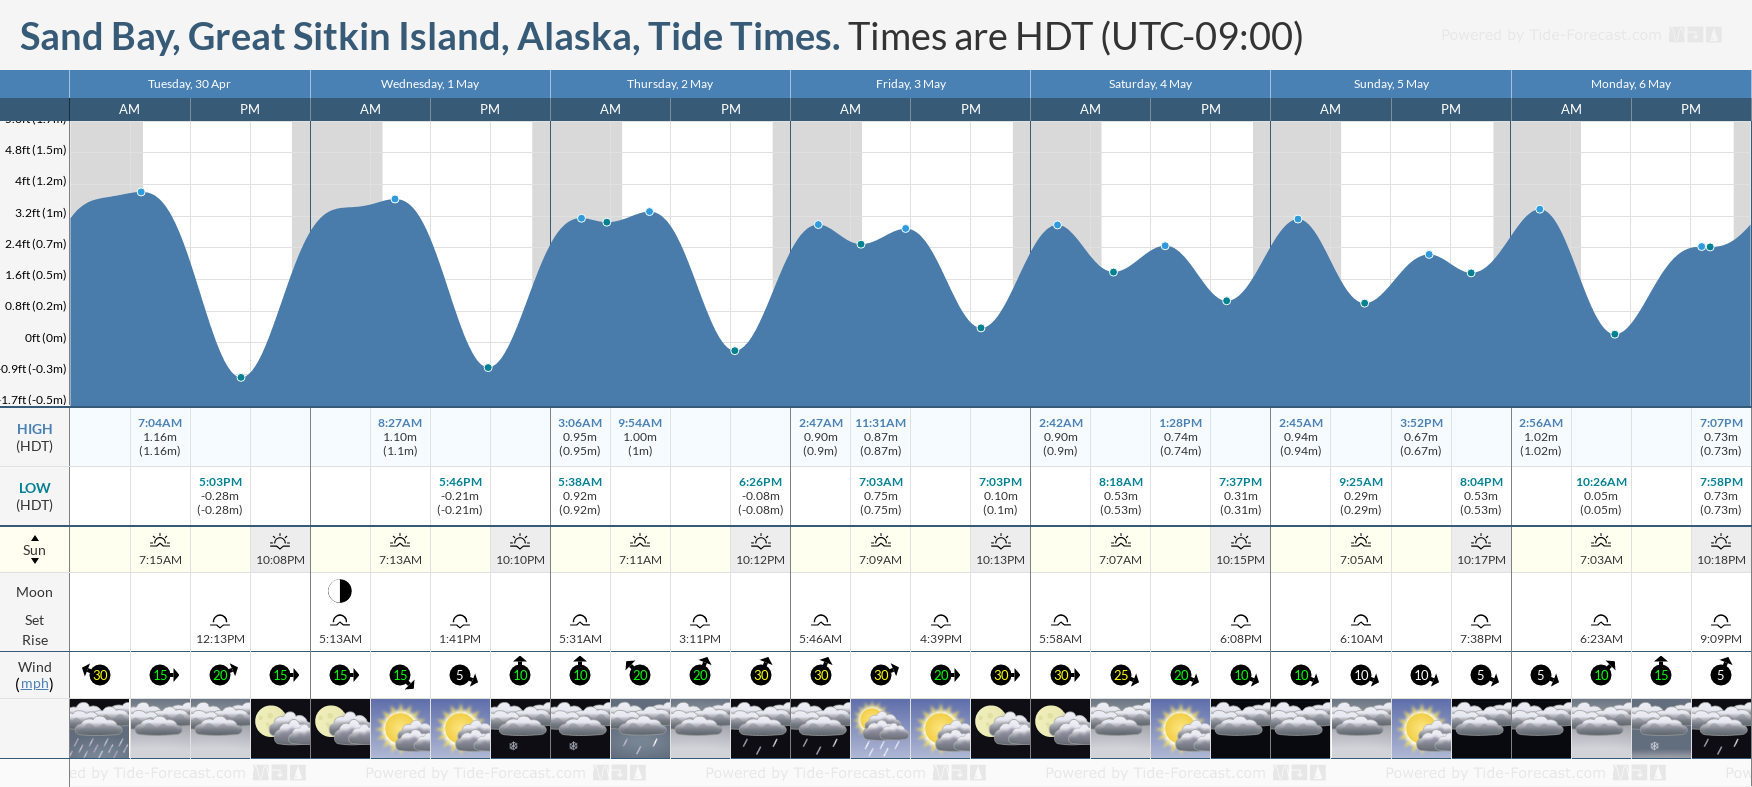 Sand Bay, Great Sitkin Island, Alaska Tide Chart including high and low tide tide times for the next 7 days